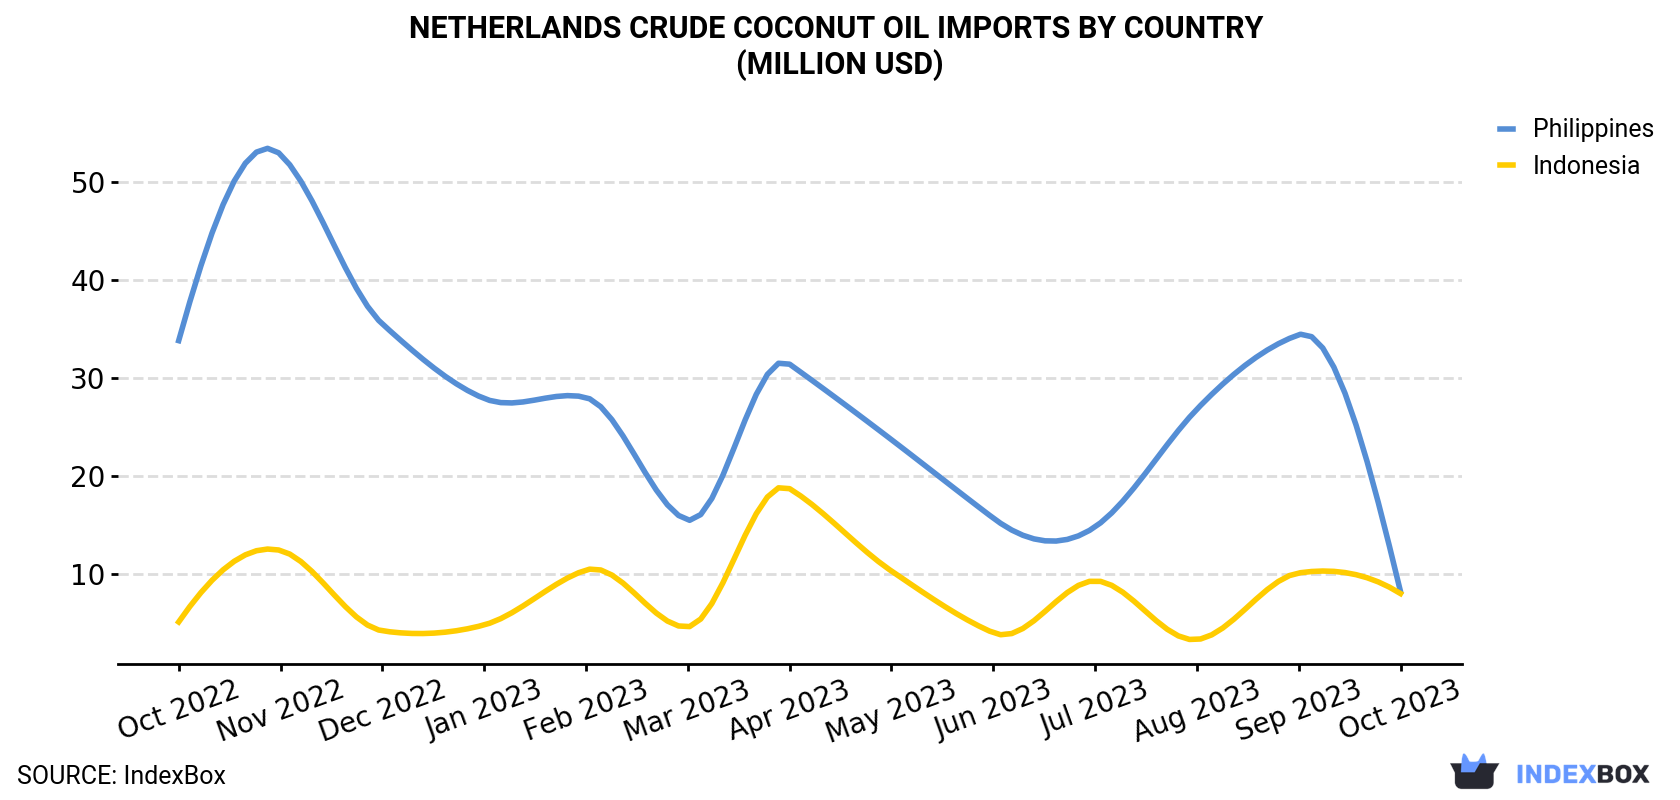 Netherlands Crude Coconut Oil Imports By Country (Million USD)